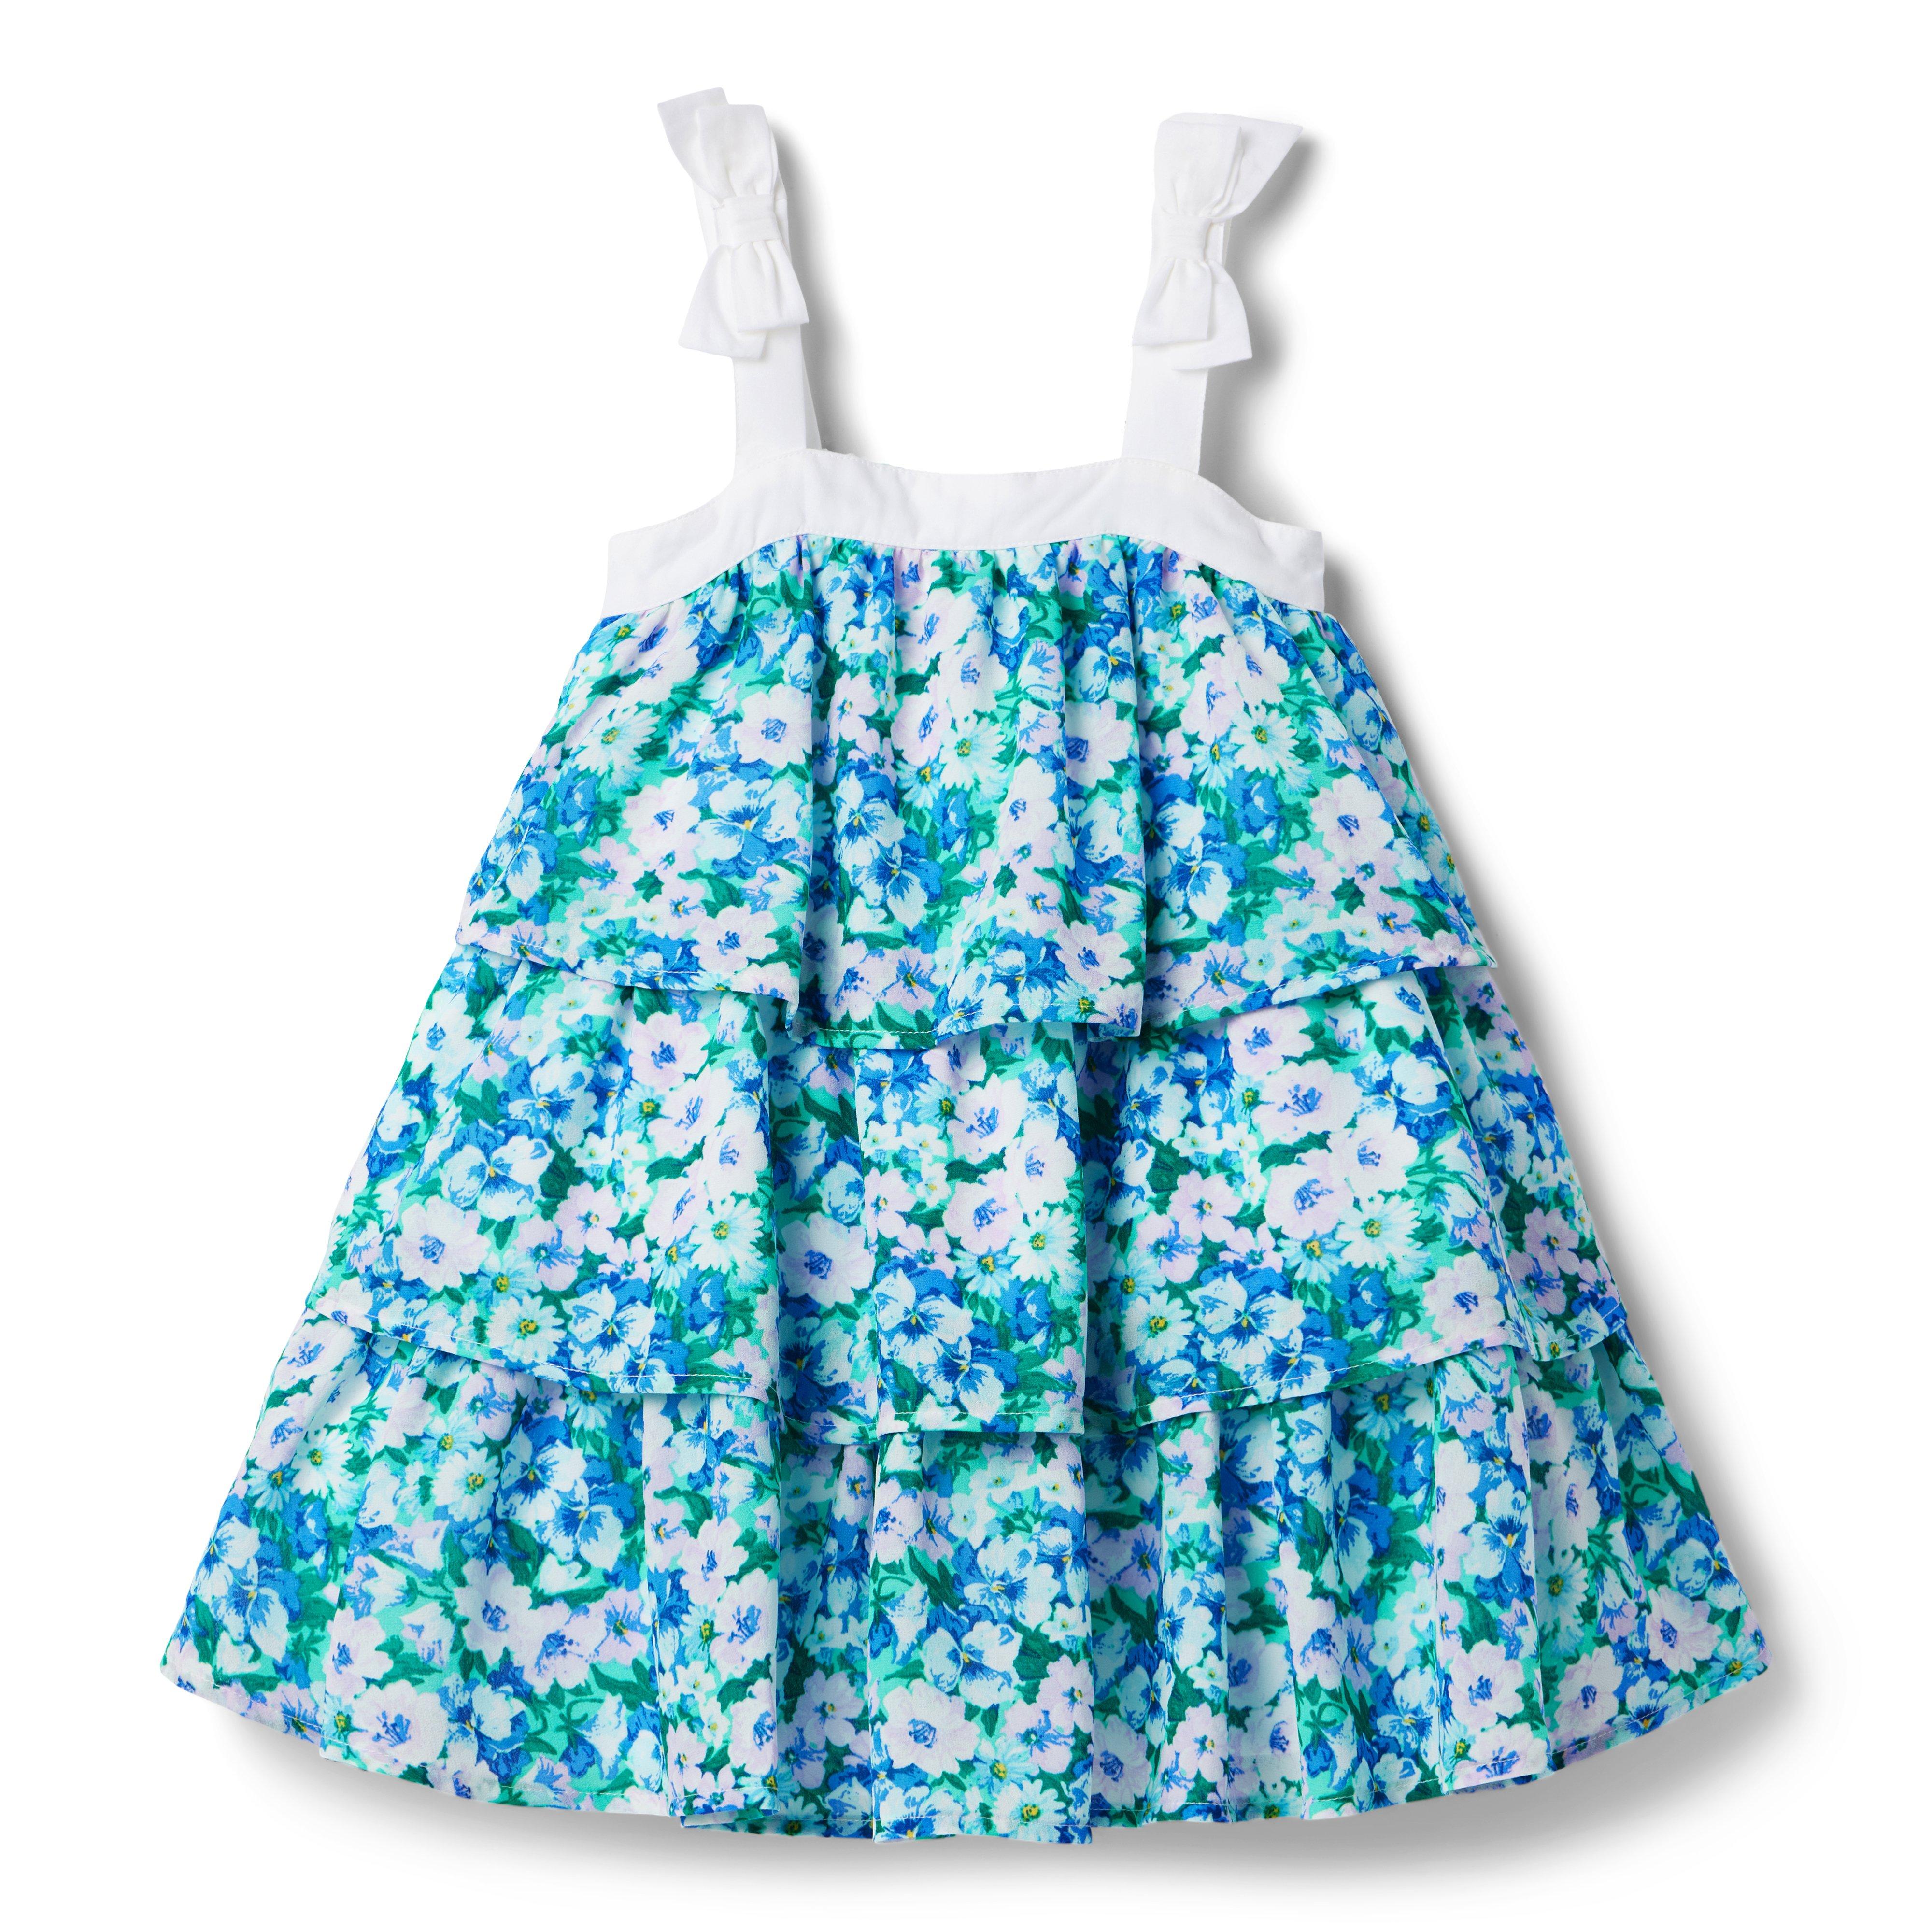 Floral Bow Strap Tiered Dress